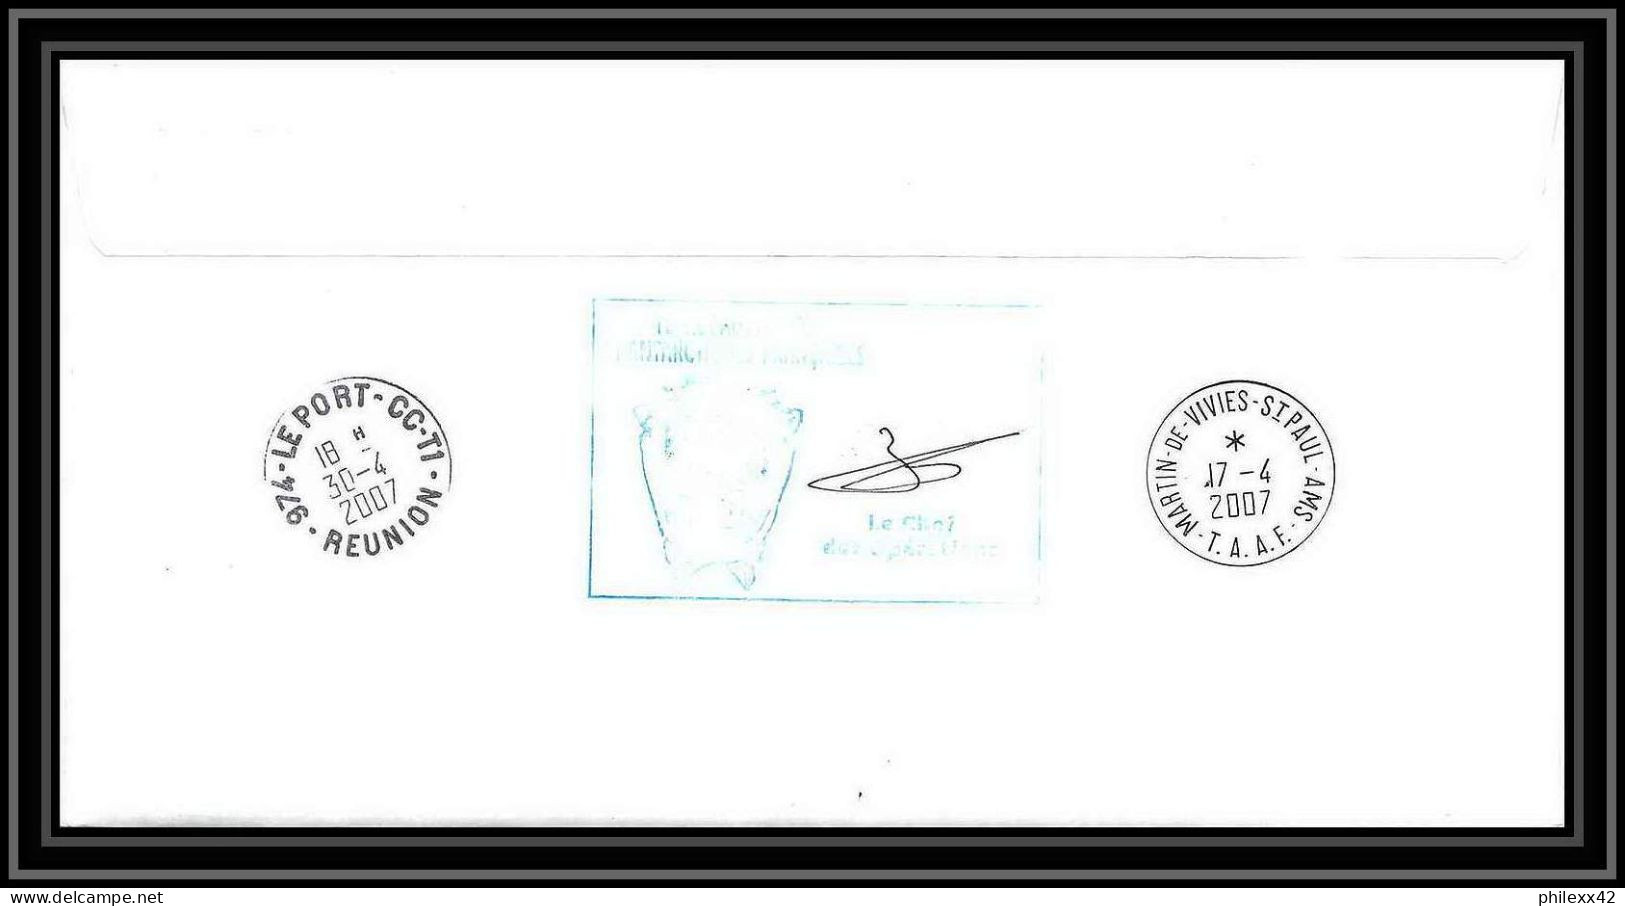 2689 Terres Australes TAAF Lettre Dufresne 2 Signé Signed Op 2007/1 N°471 17/4/2007 Amsterdam Oiseaux (birds) - Antarctic Expeditions